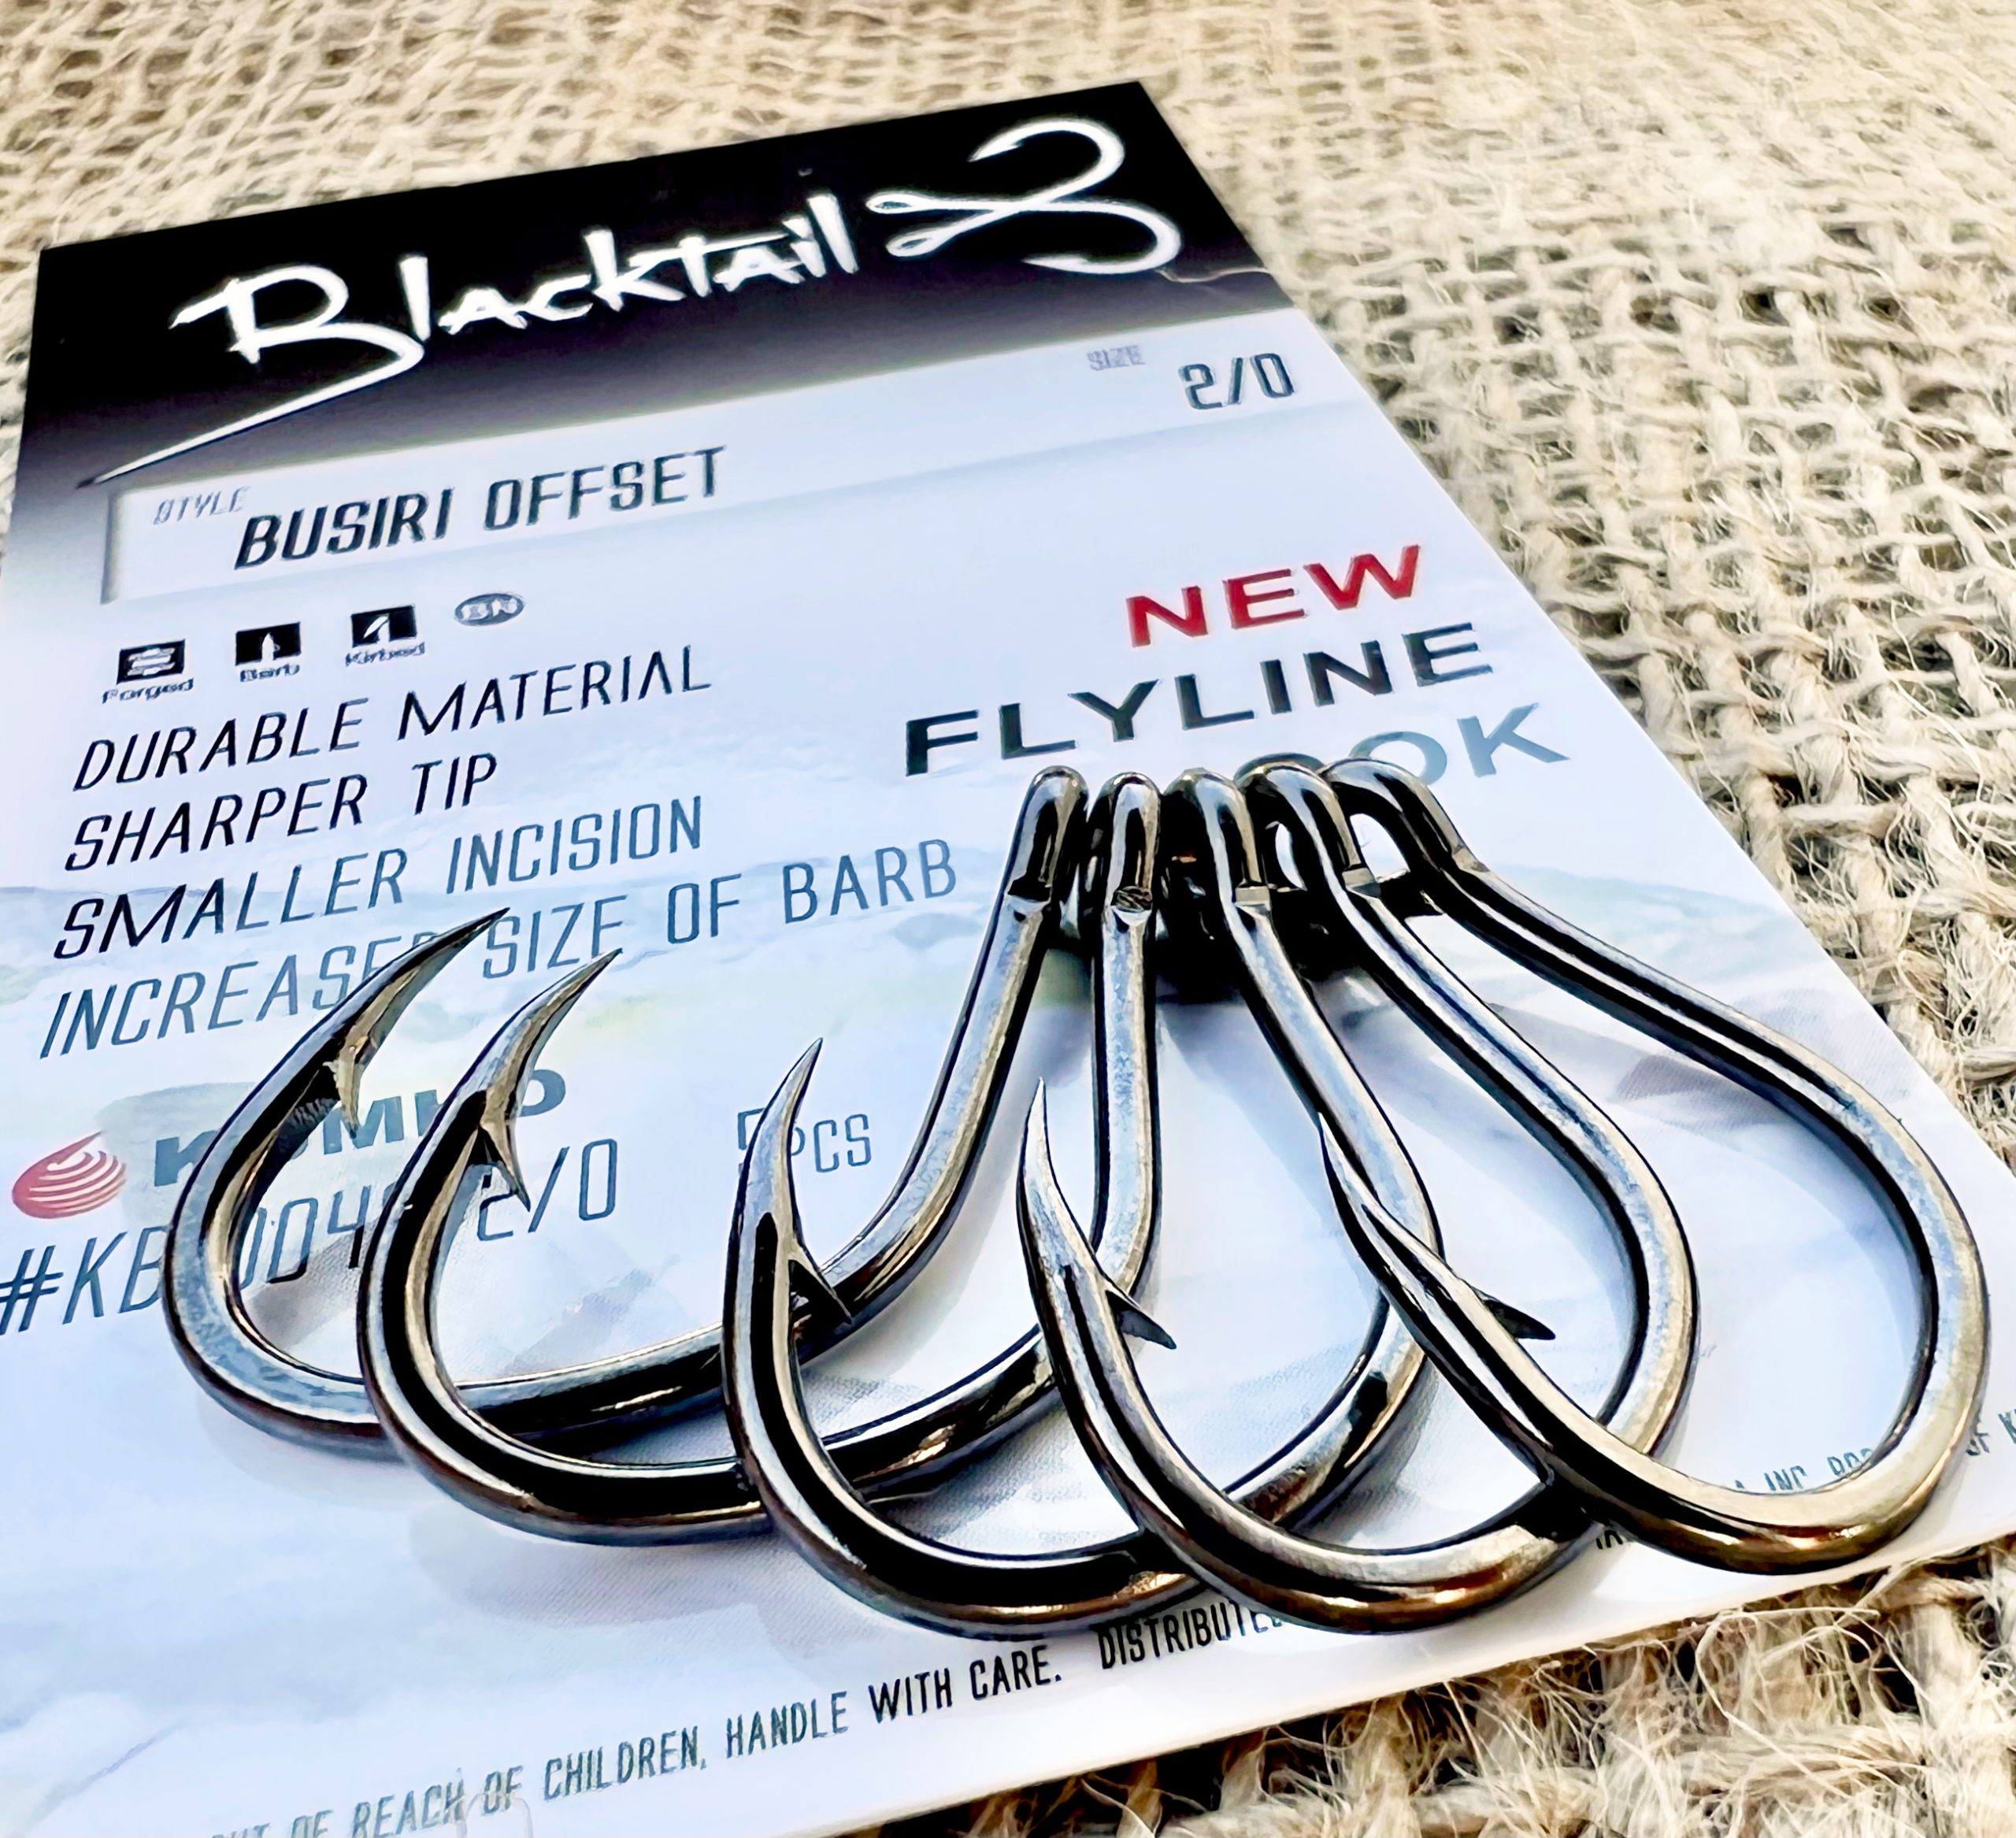 Busiri Offset Flyline Hook - Slick and Strong Design for Yellowtail